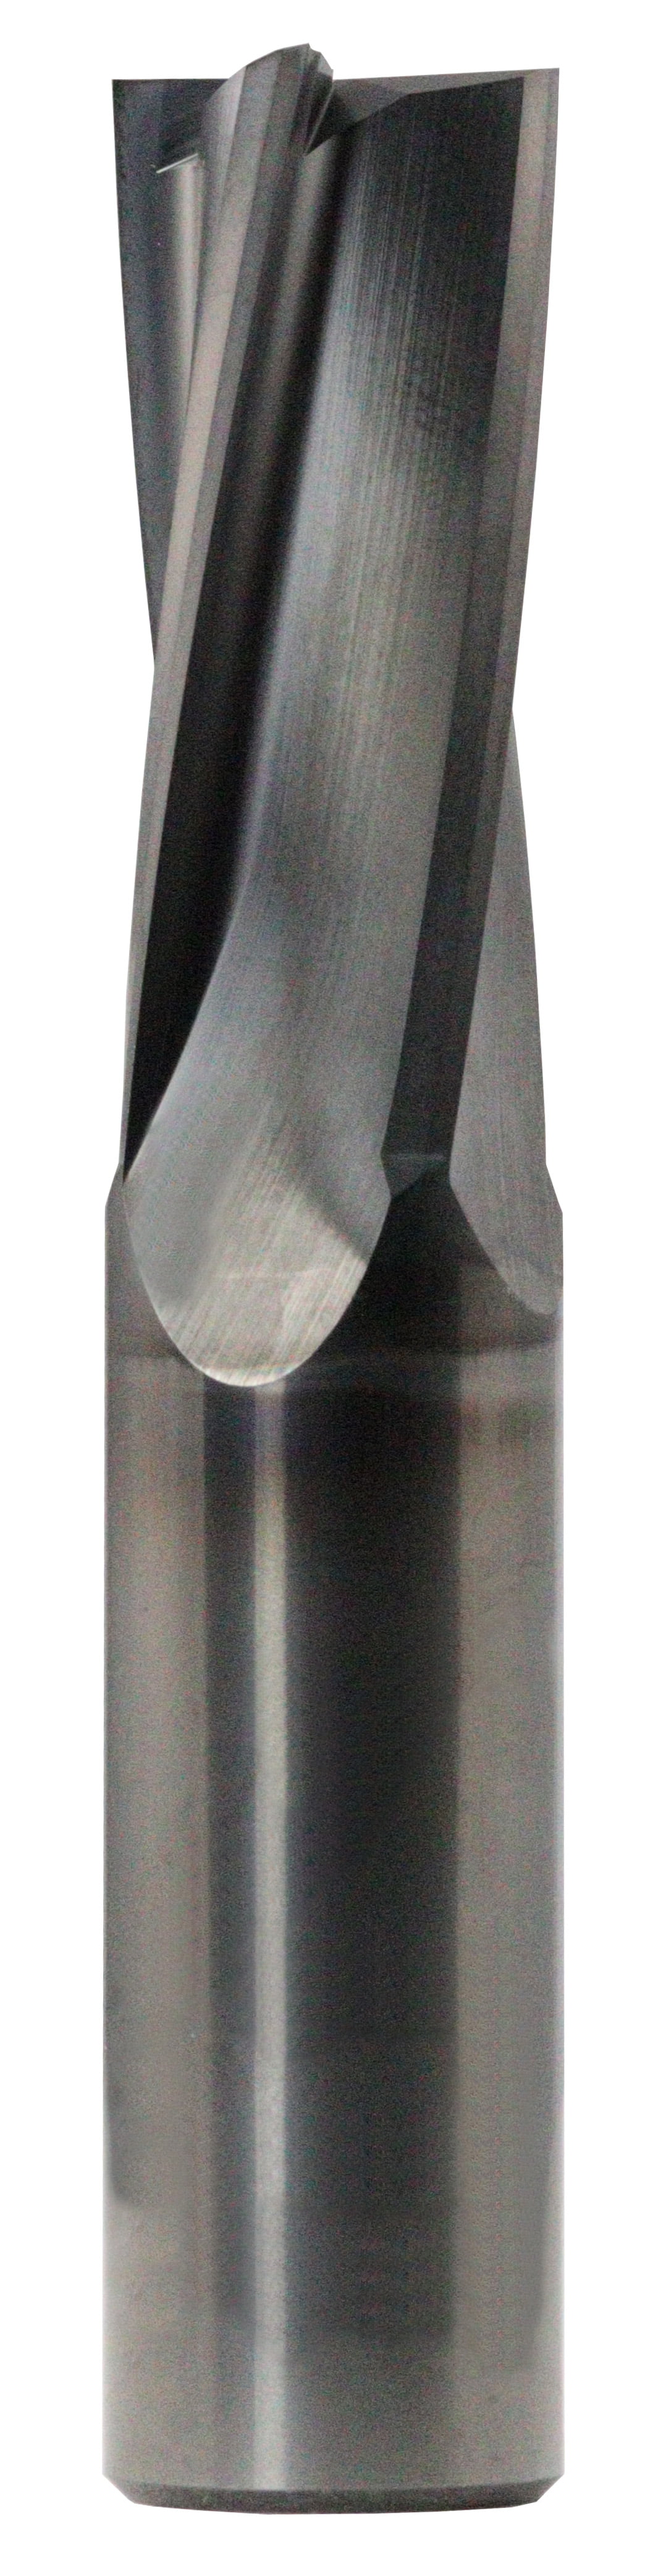 1/4" Dia, 4 Flute, Square End End Mill - 72978